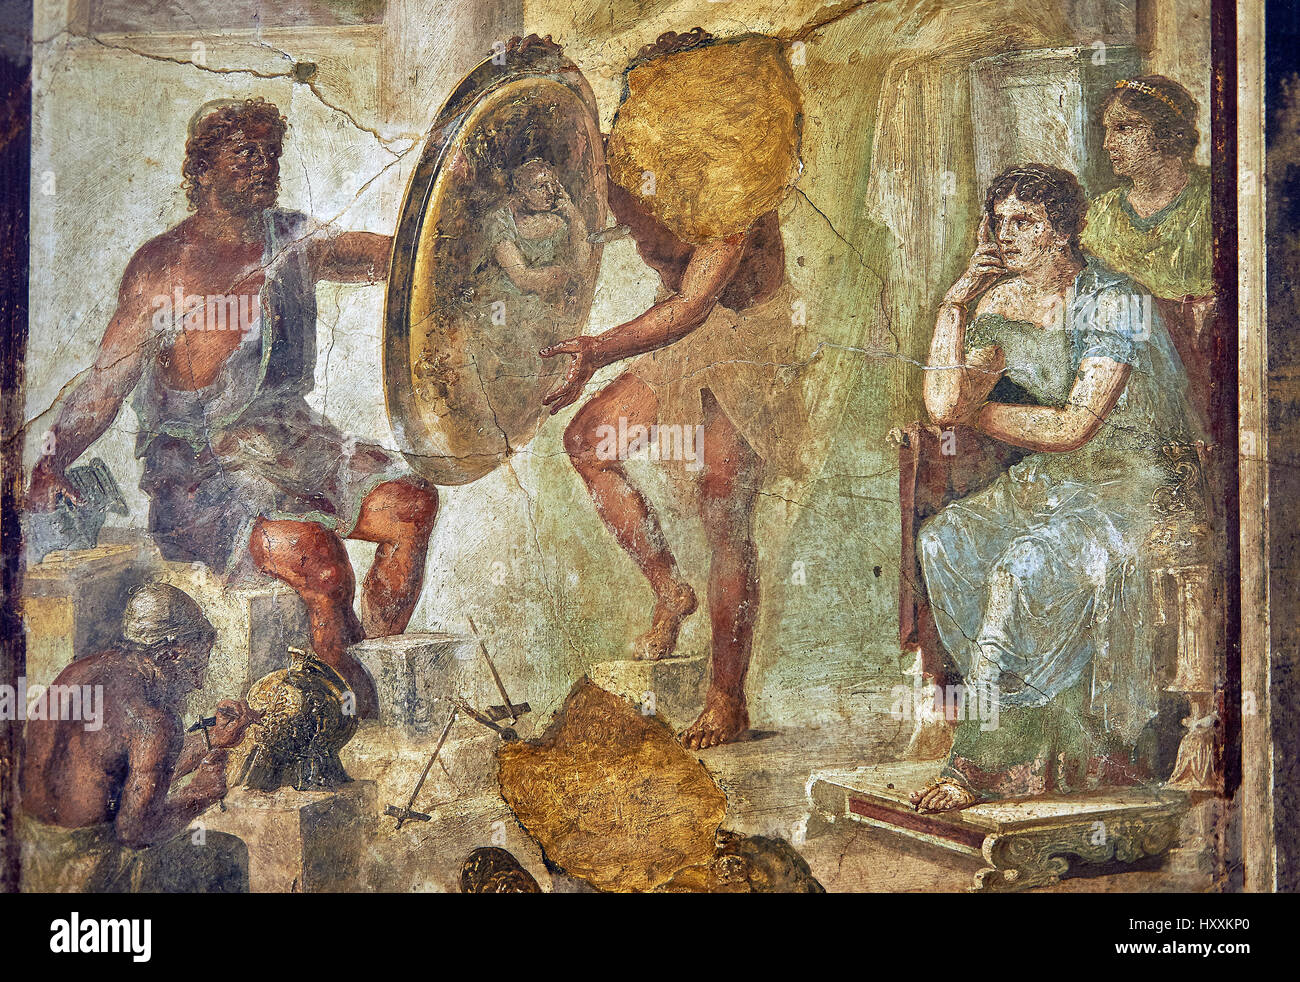 Roman fresco wall painting of Thetsis looking at her reflection in a golden shield that Hephaistos has made for Achilles, Pompeii IX 1.7, inv 9529, Stock Photo